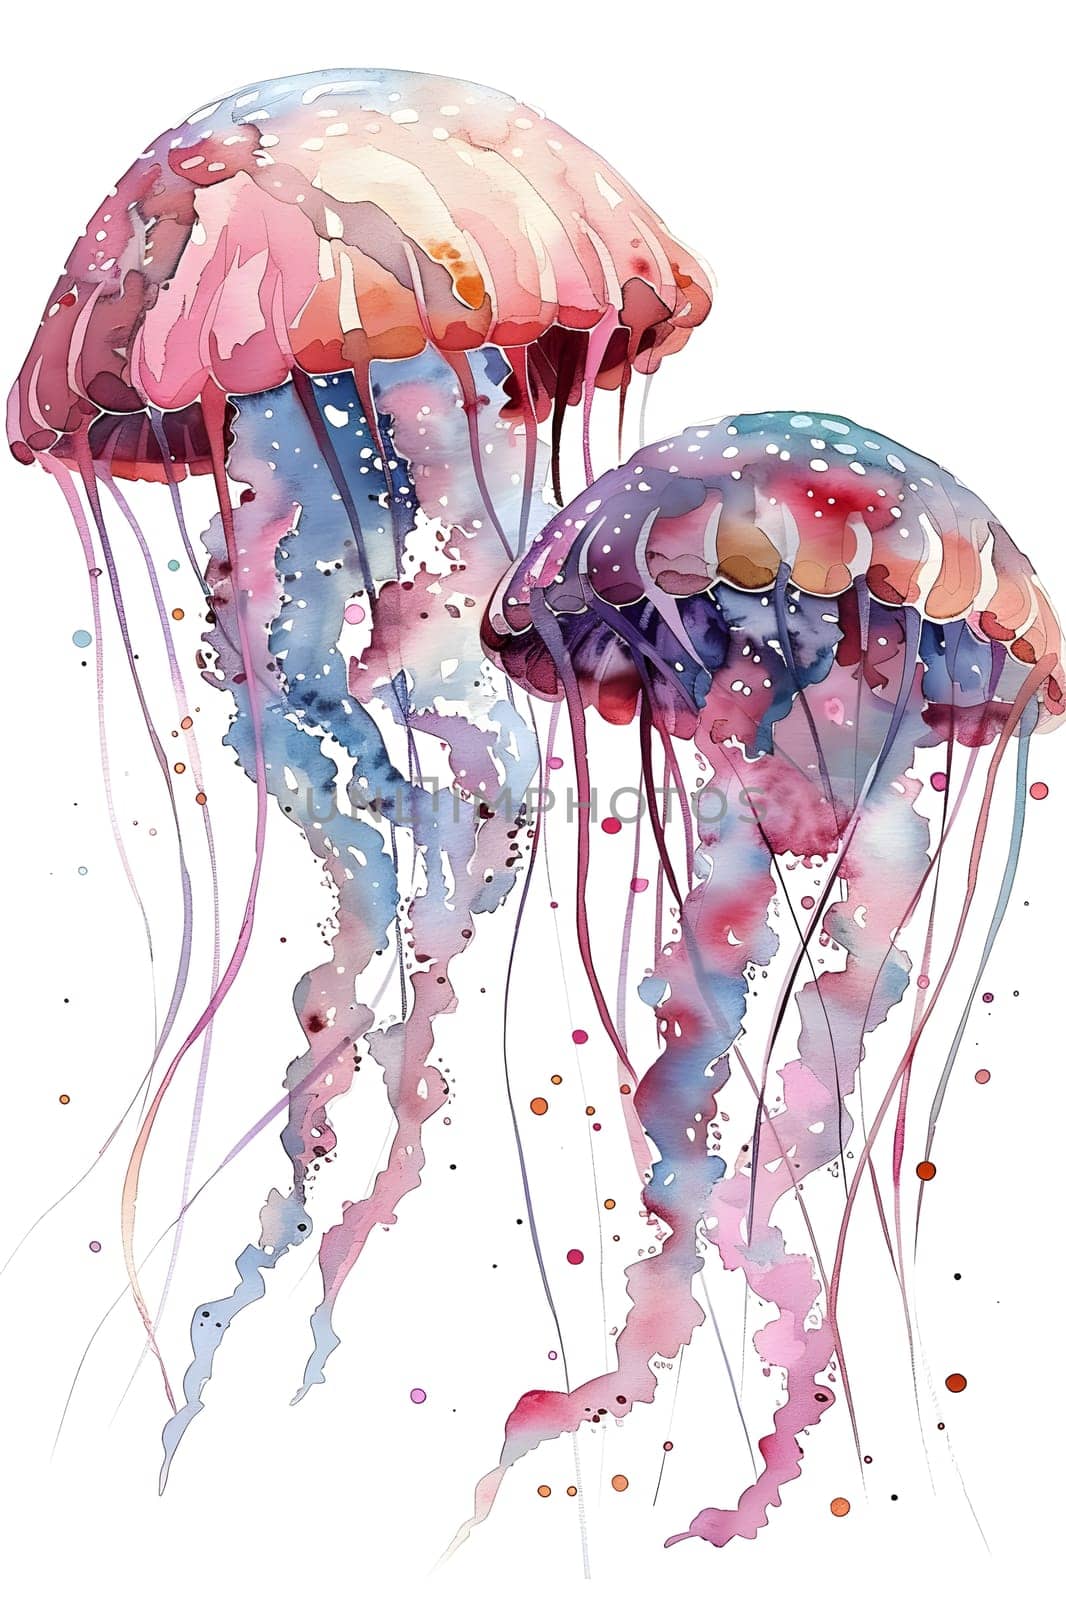 A vibrant watercolor painting illustrating two colorful jellyfish, one in electric blue and the other in magenta, set against a pristine white background